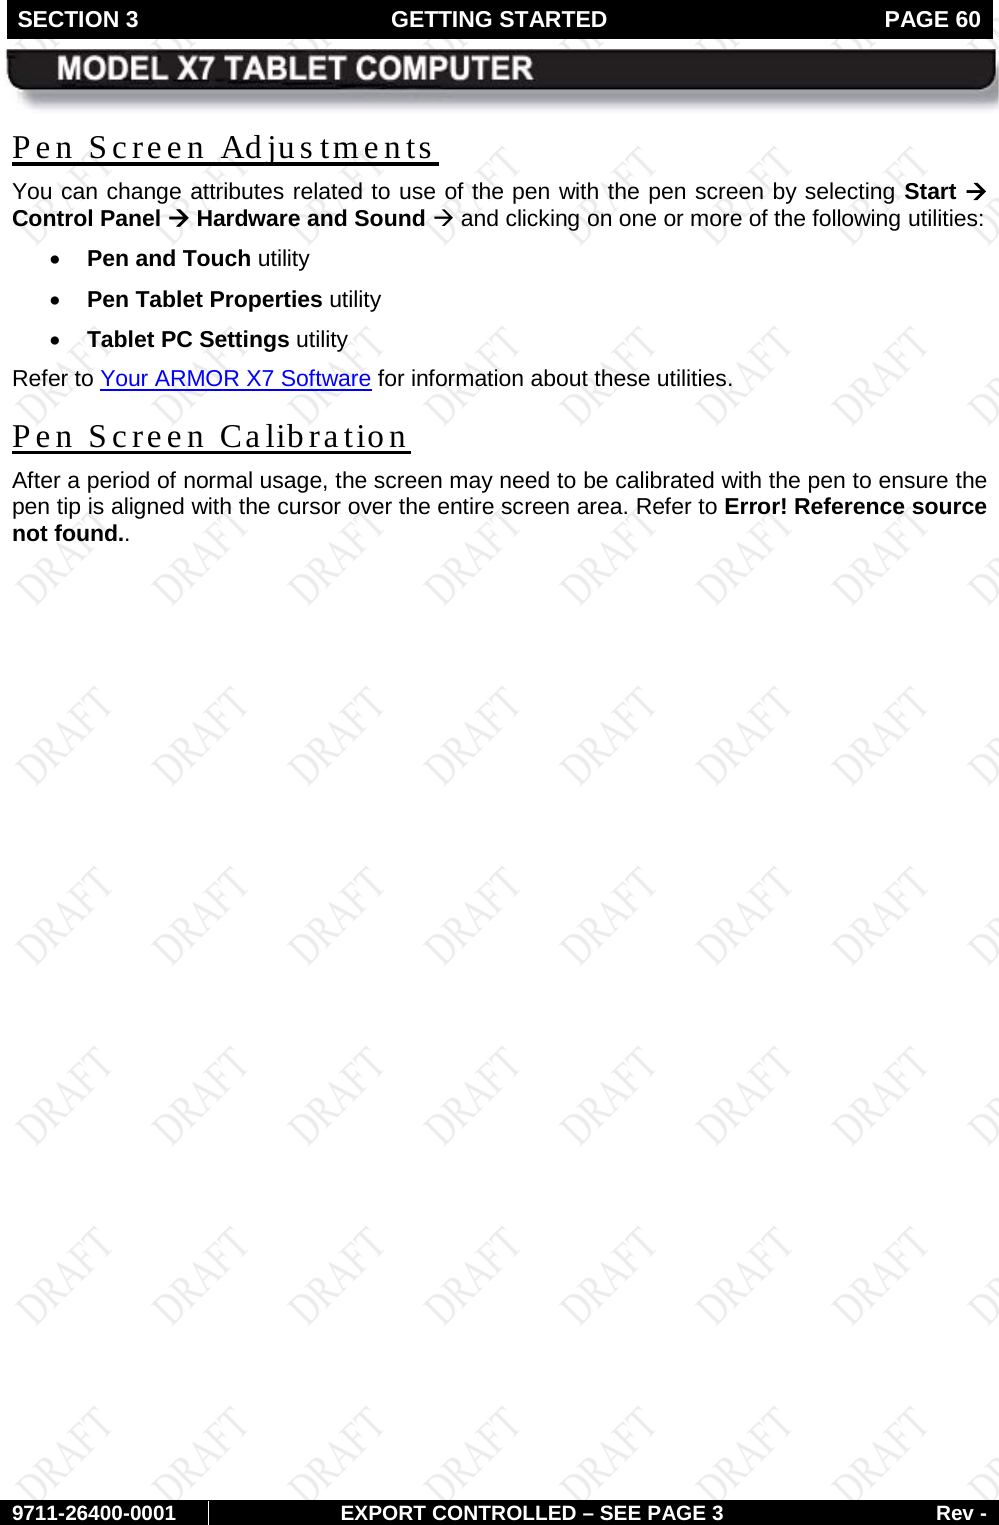 SECTION 3 GETTING STARTED  PAGE 60        9711-26400-0001 EXPORT CONTROLLED – SEE PAGE 3 Rev - Pen Screen Adjus tments  You can change attributes related to use of the pen with the pen screen by selecting Start à Control Panel à Hardware and Sound à and clicking on one or more of the following utilities: • Pen and Touch utility  • Pen Tablet Properties utility  • Tablet PC Settings utility Refer to Your ARMOR X7 Software for information about these utilities. Pen Screen Calibration After a period of normal usage, the screen may need to be calibrated with the pen to ensure the pen tip is aligned with the cursor over the entire screen area. Refer to Error! Reference source not found..   